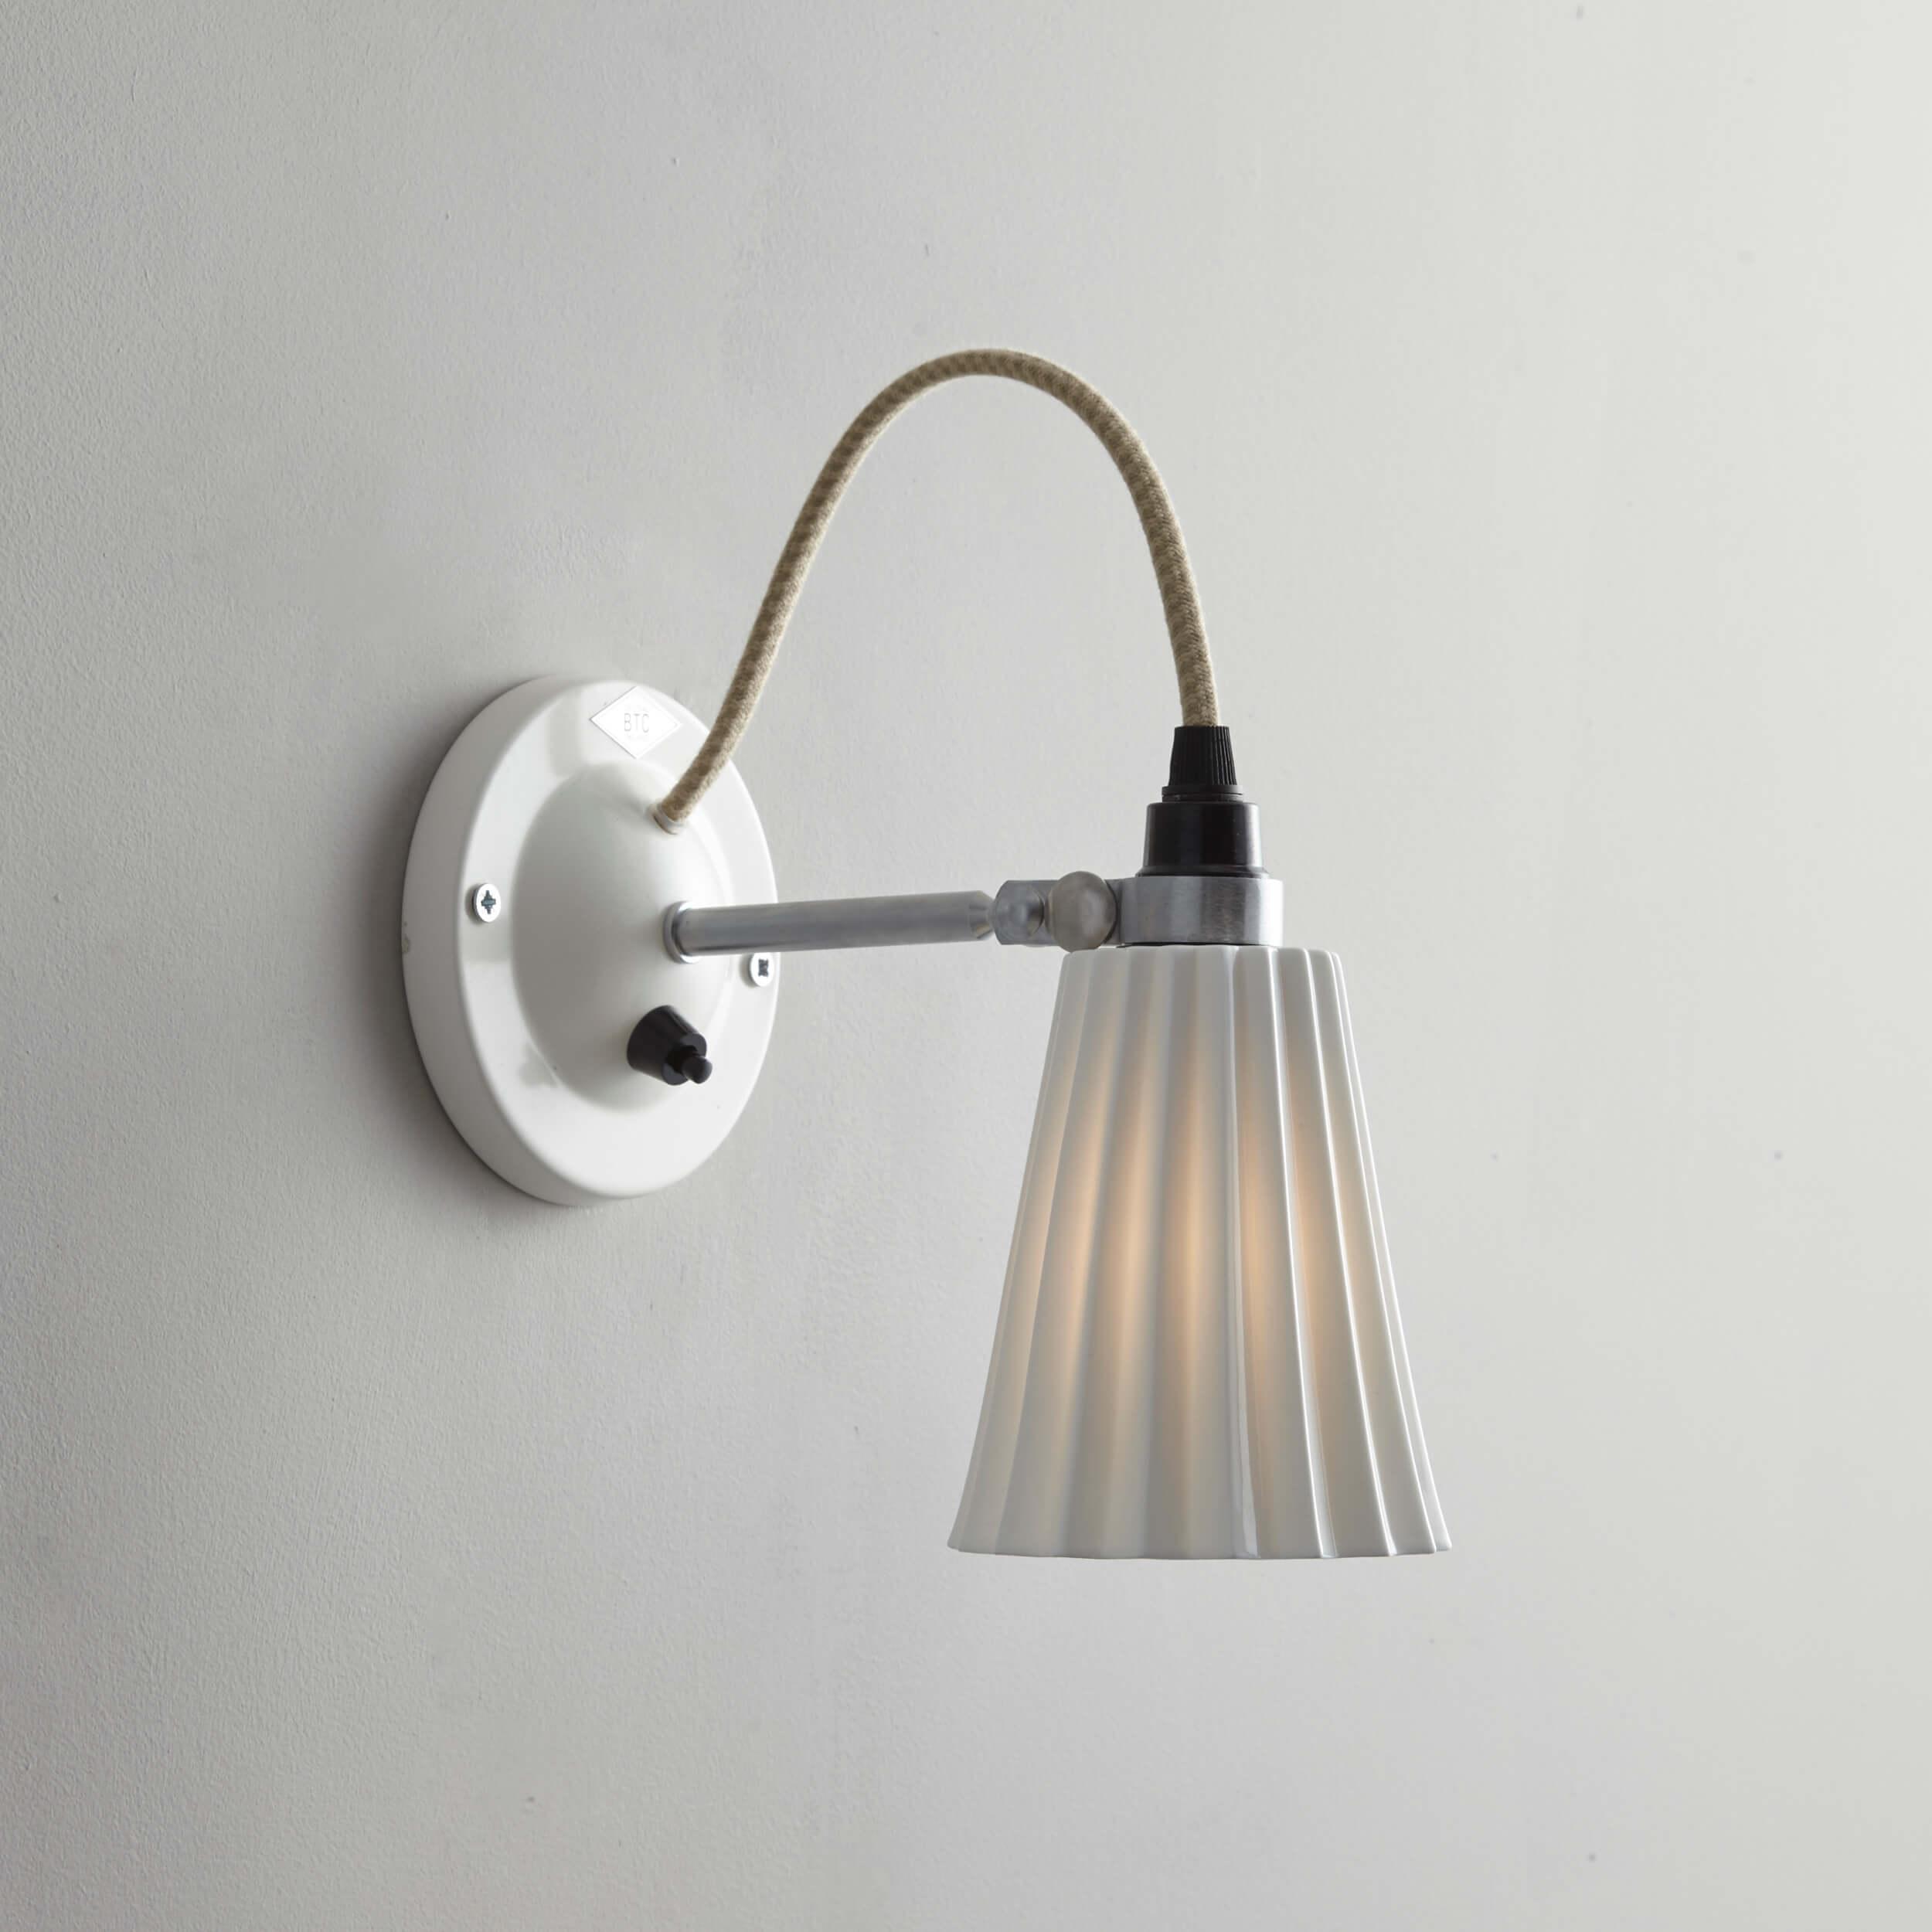 Original BTC - Hector Pleat Switched Wall Light - US-FW506N | Montreal Lighting & Hardware